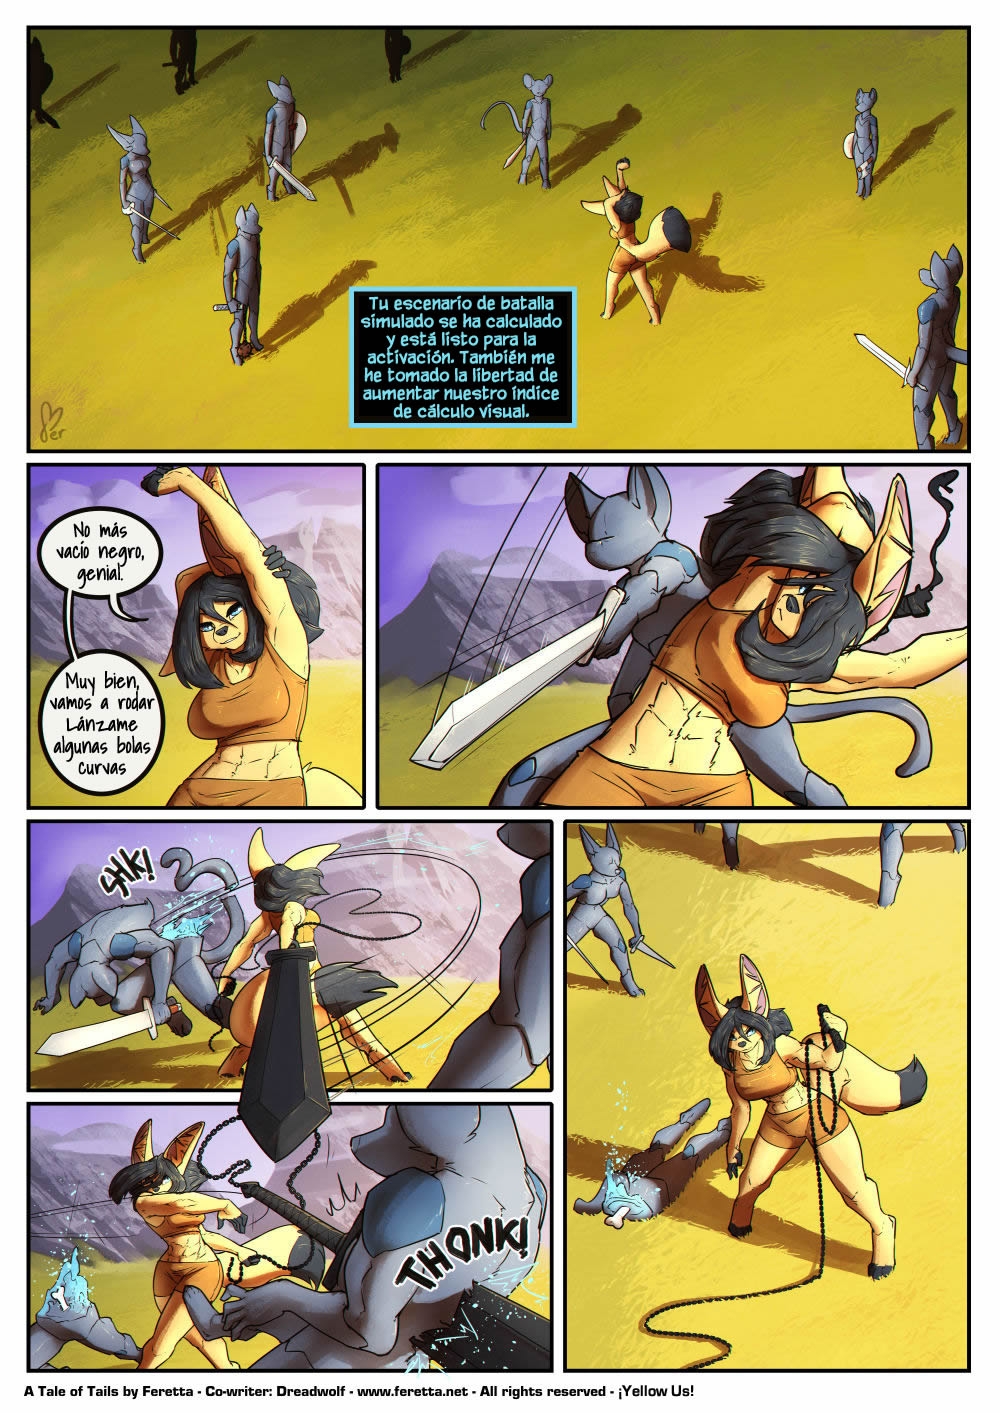 [Feretta] A Tale of Tails: Chapter 6 - Paths converge / Los caminos convergen [Spanish] [Red Fox Makkan] 48